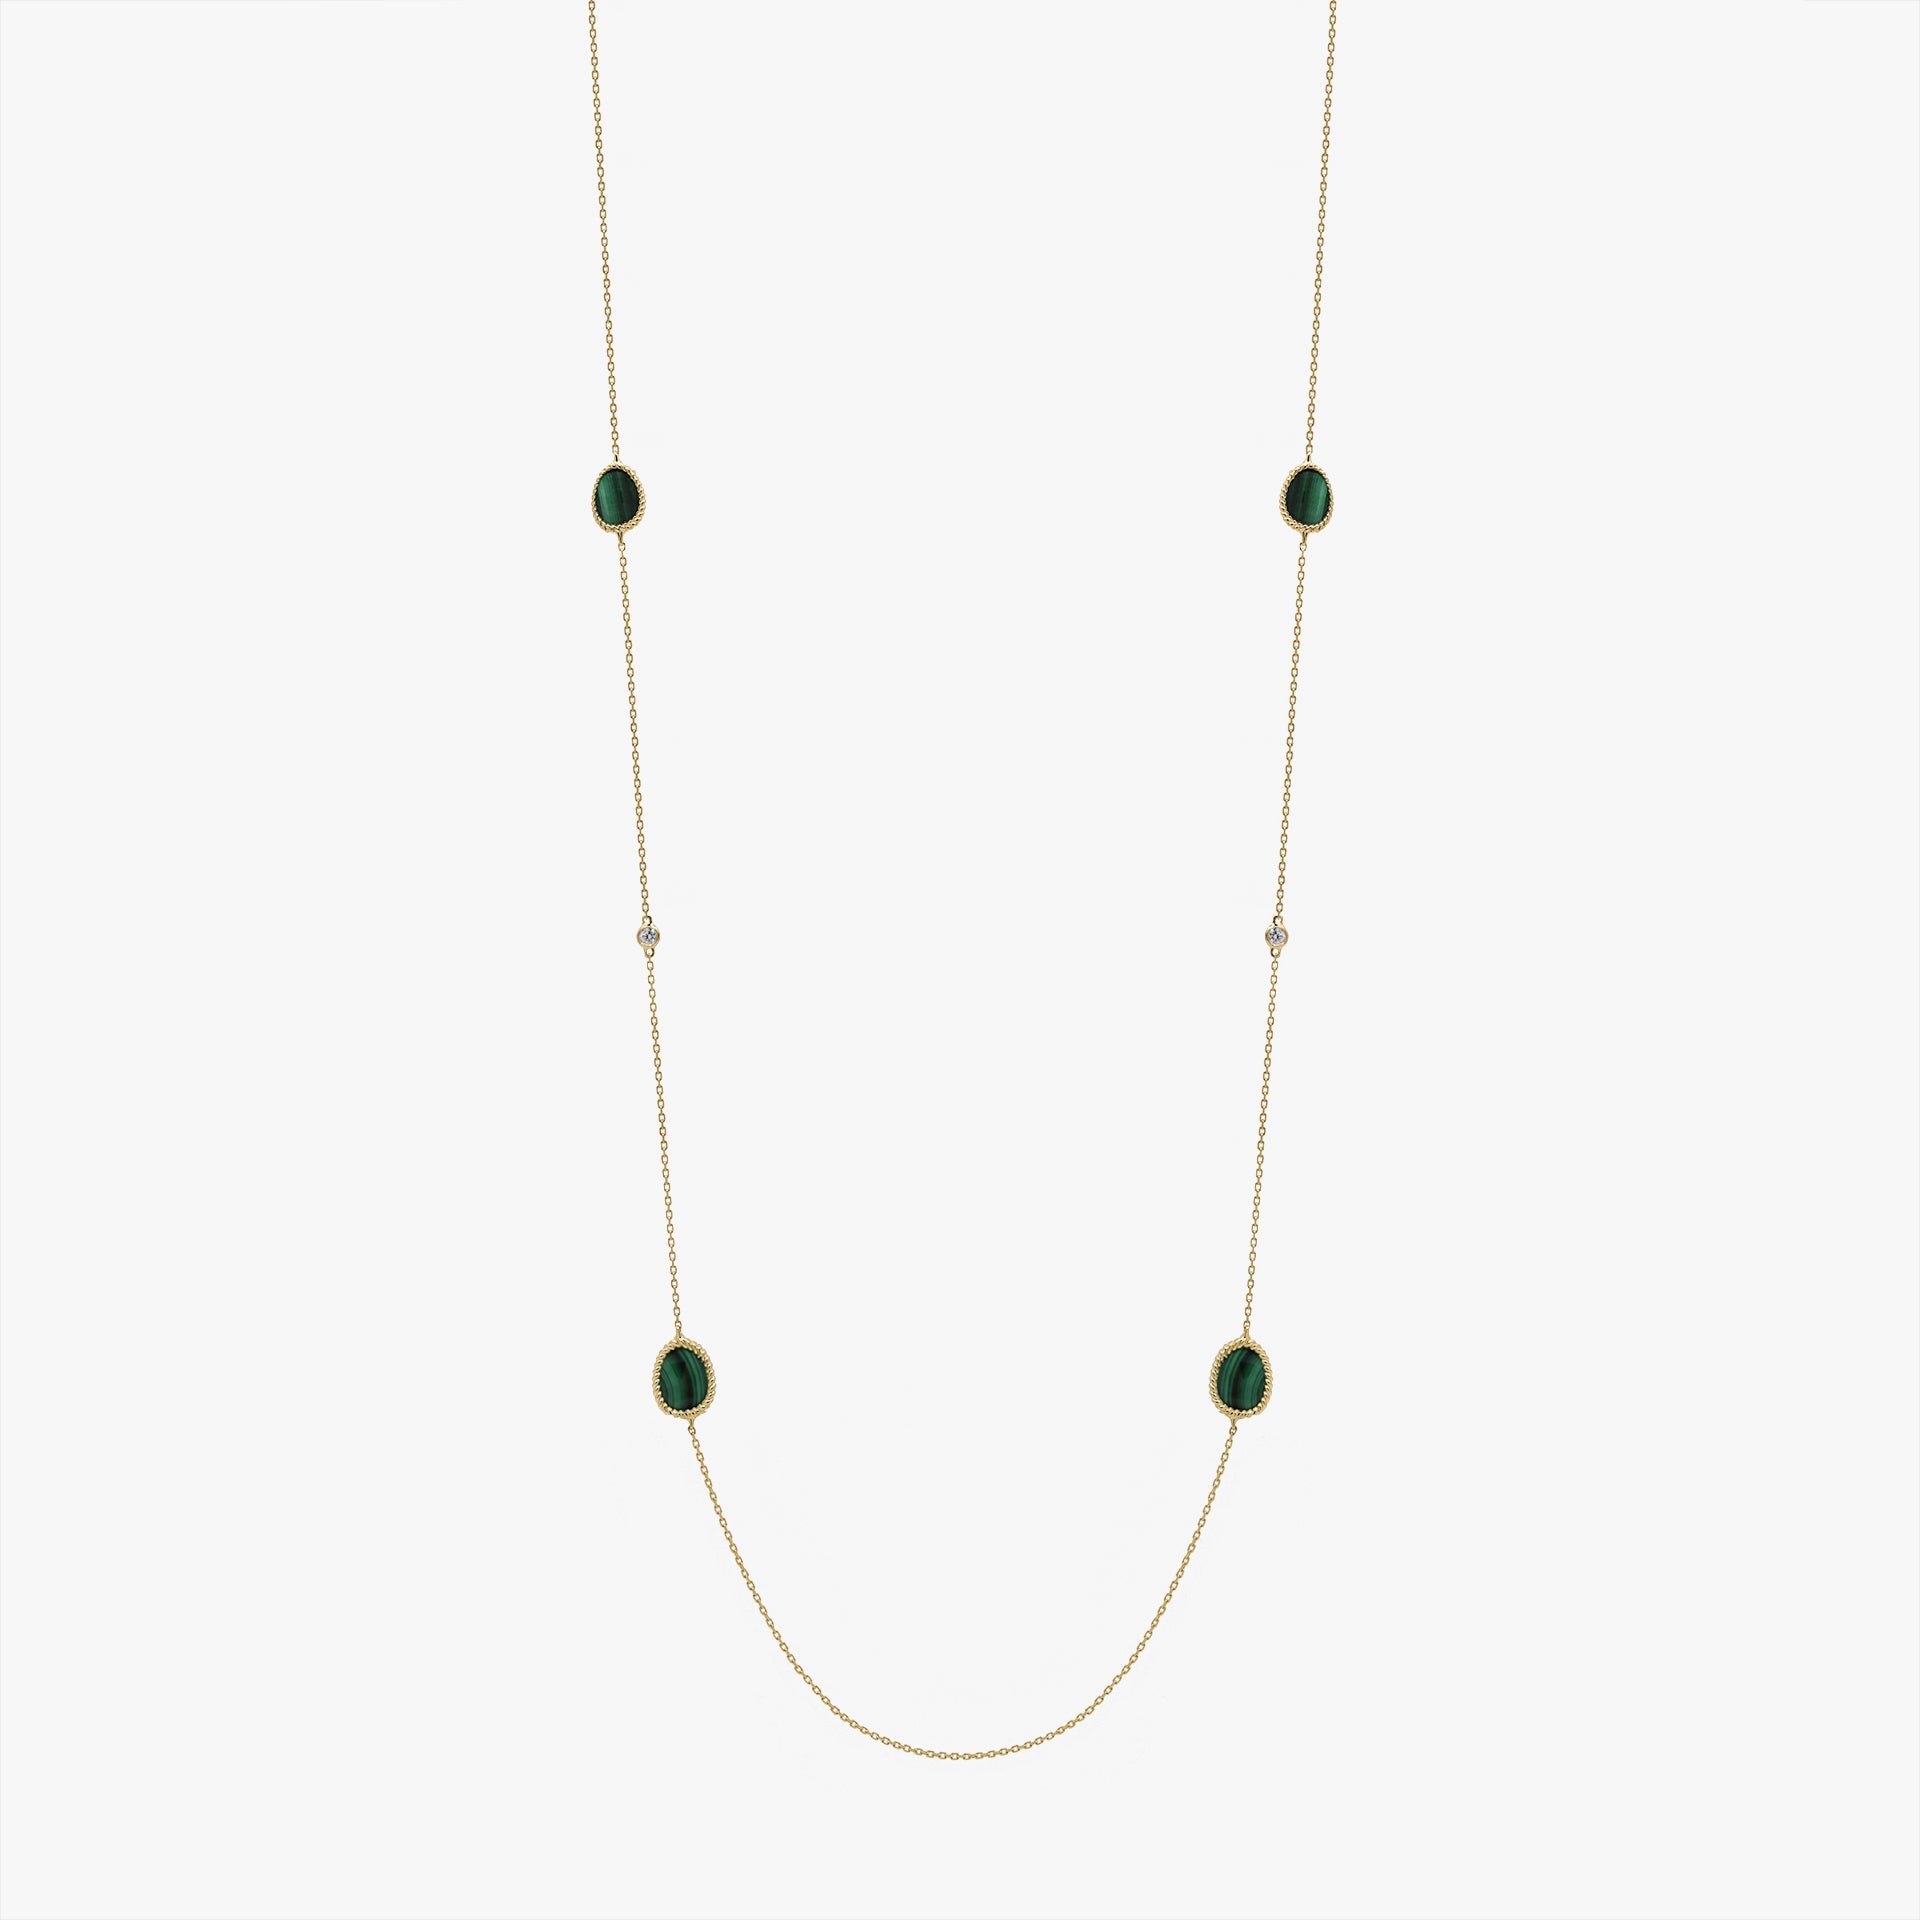 Nina Mariner Long Necklace In 18 Karat Yellow Gold With Natural White Diamonds And Malachite Stones